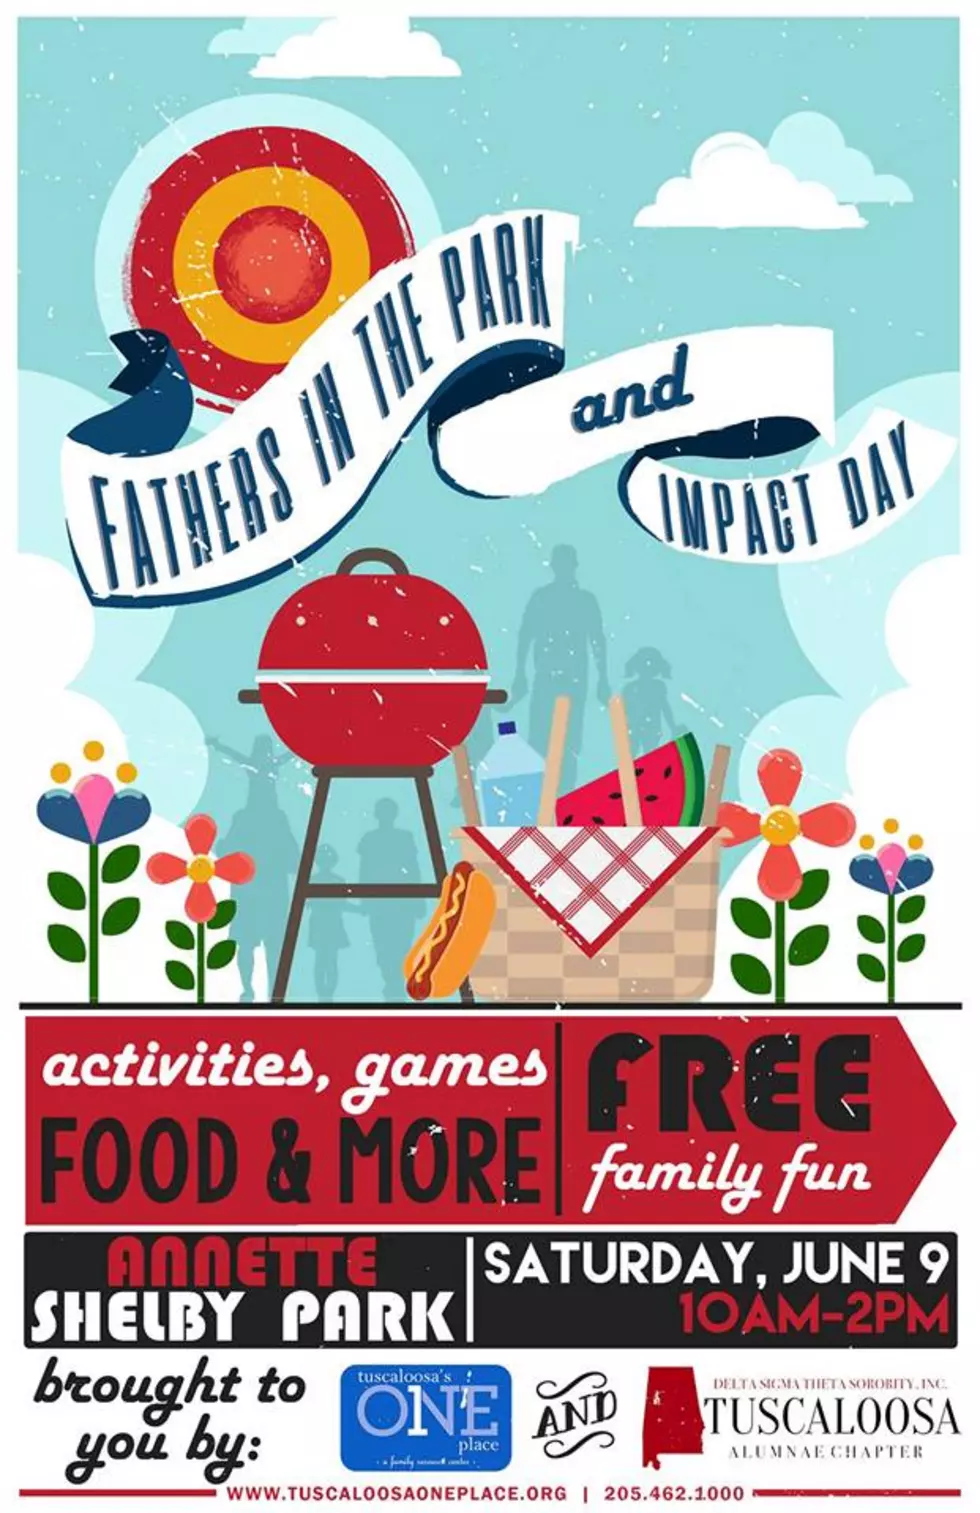 Tuscaloosa&#8217;s One Place to Host Fathers in the Park and Impact Day Saturday, June 9, 2018